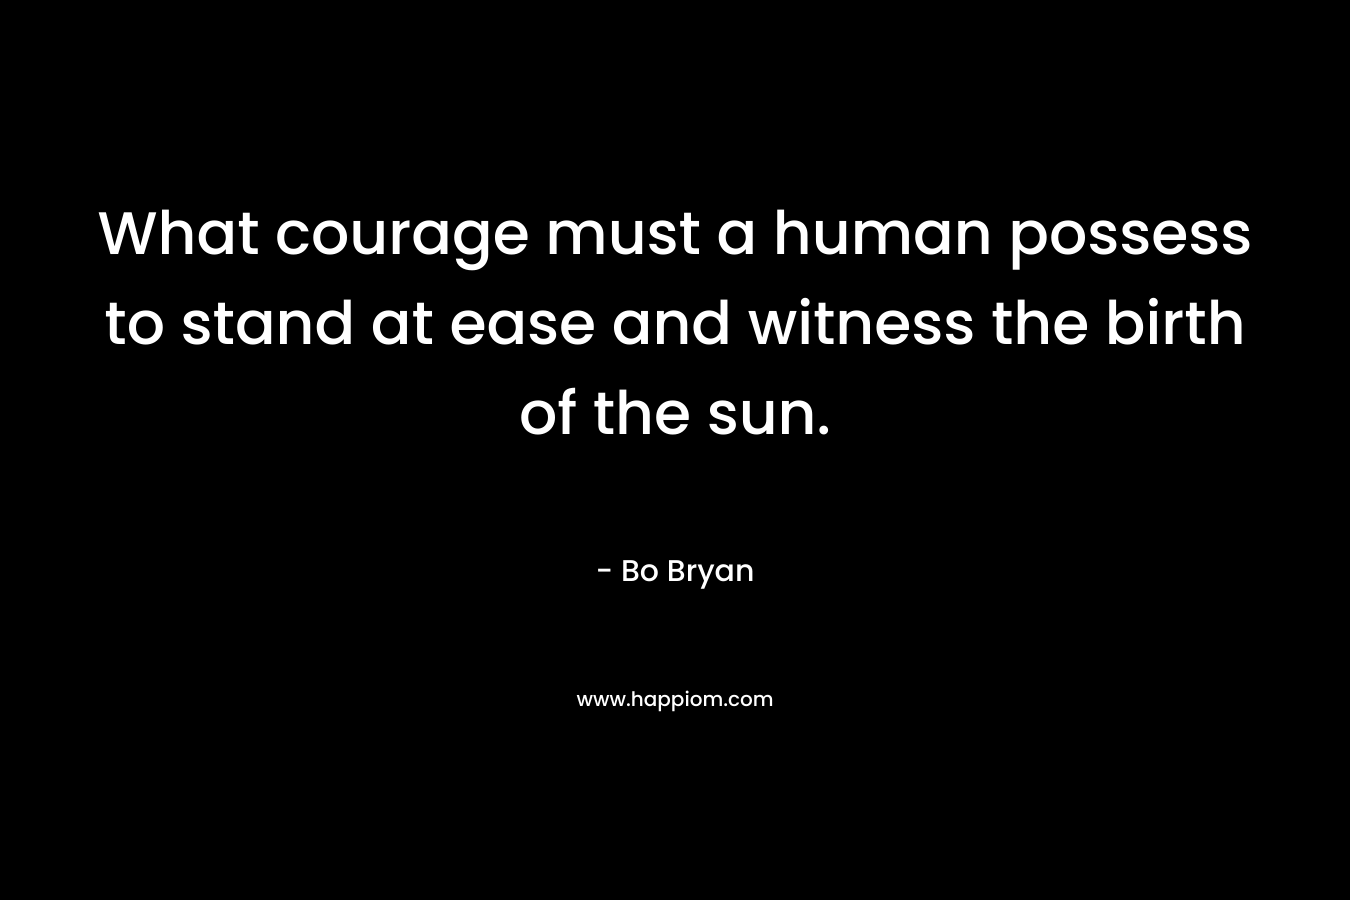 What courage must a human possess to stand at ease and witness the birth of the sun.